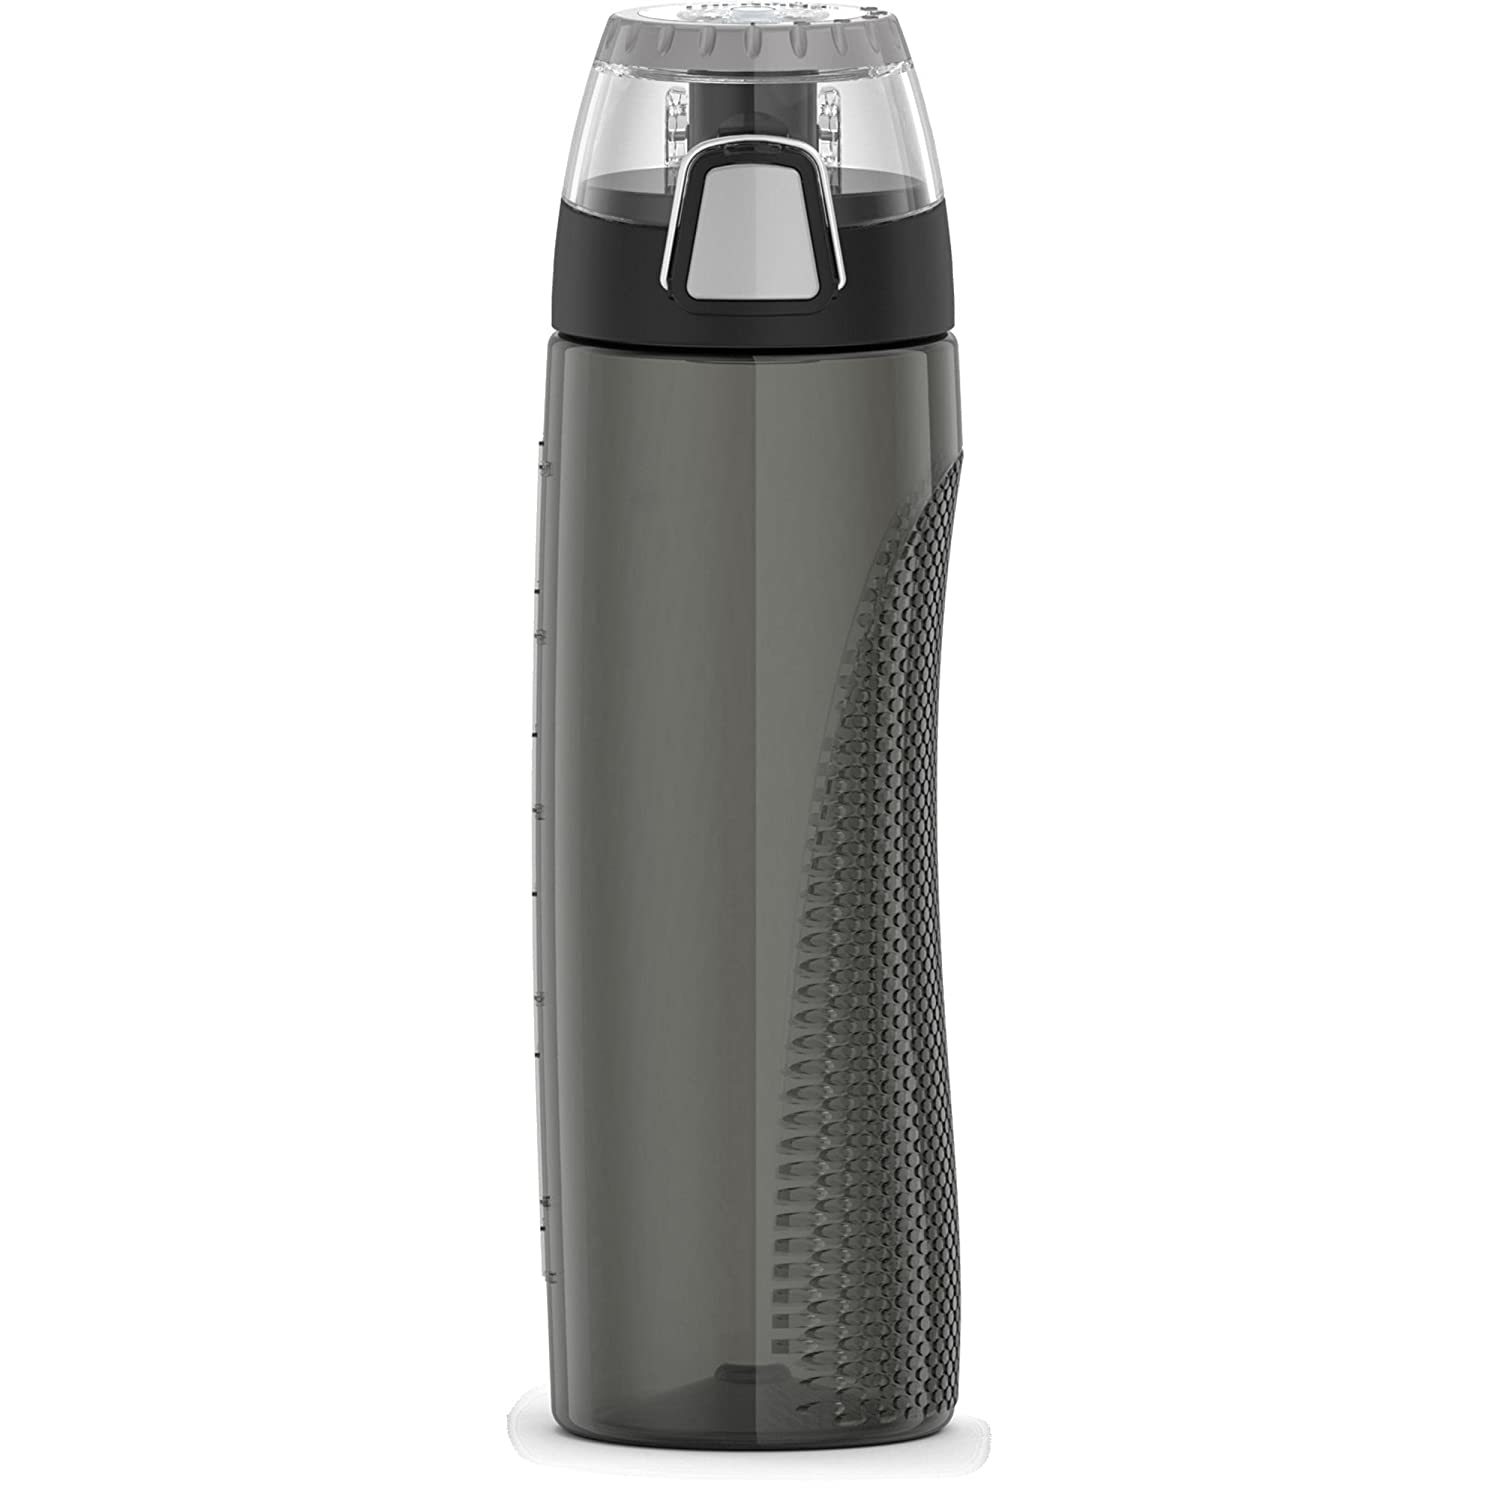 THERMOS Intak 24 Ounce Hydration Bottle with Meter, Smoke - $37.99